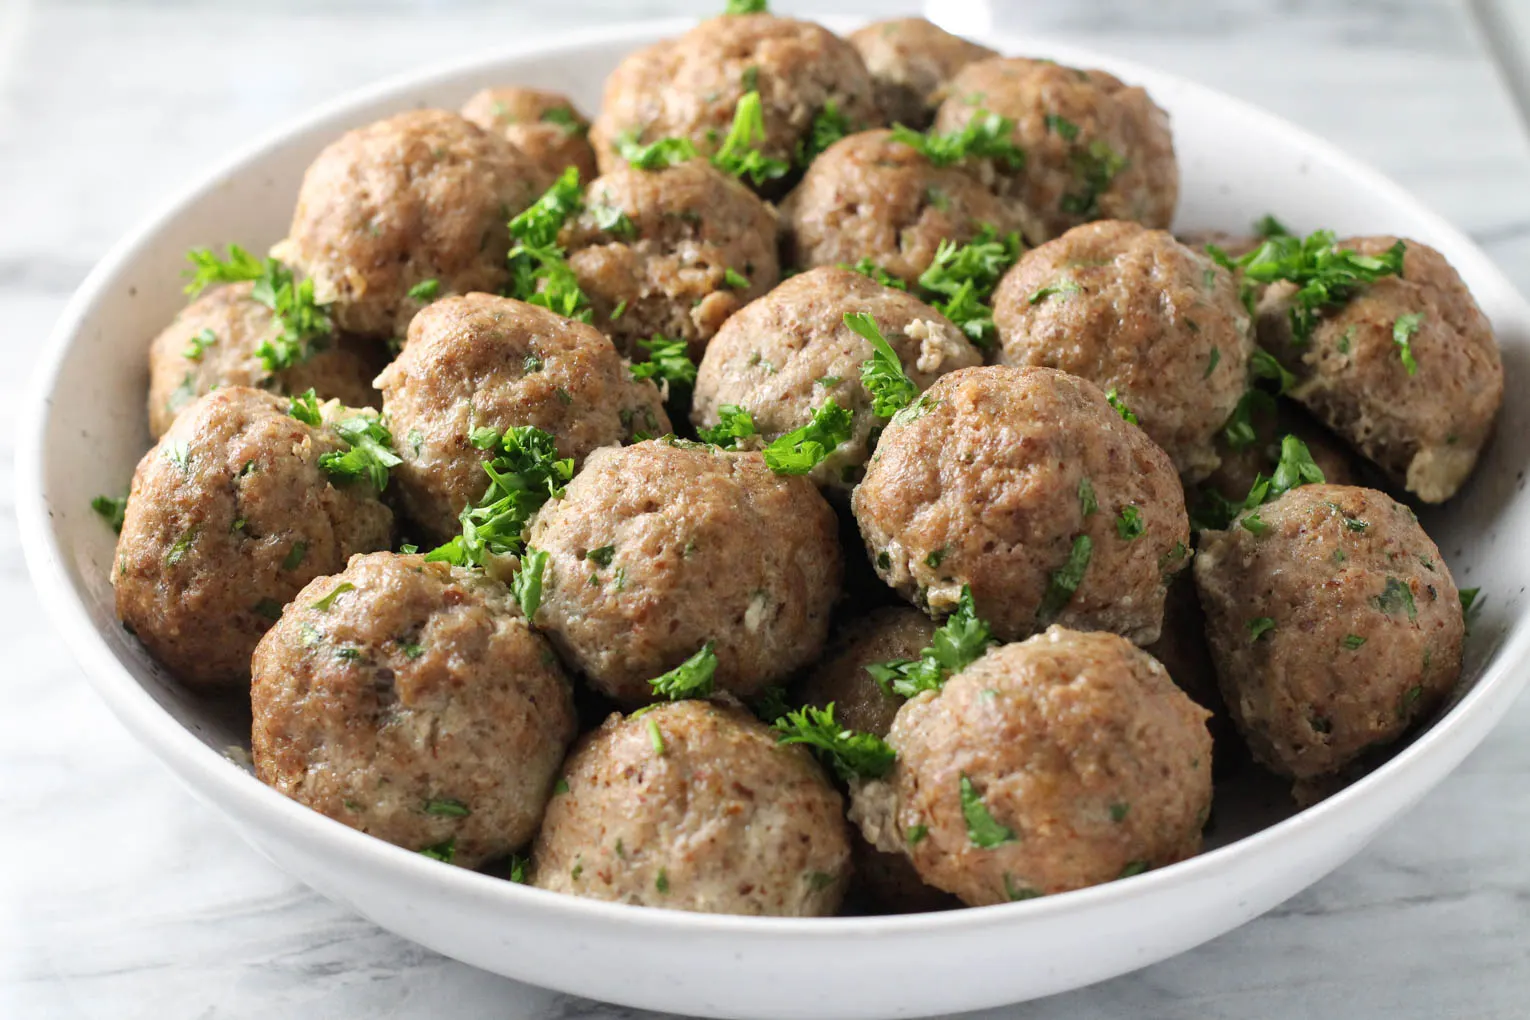 Side view of meatballs in a white bowl.